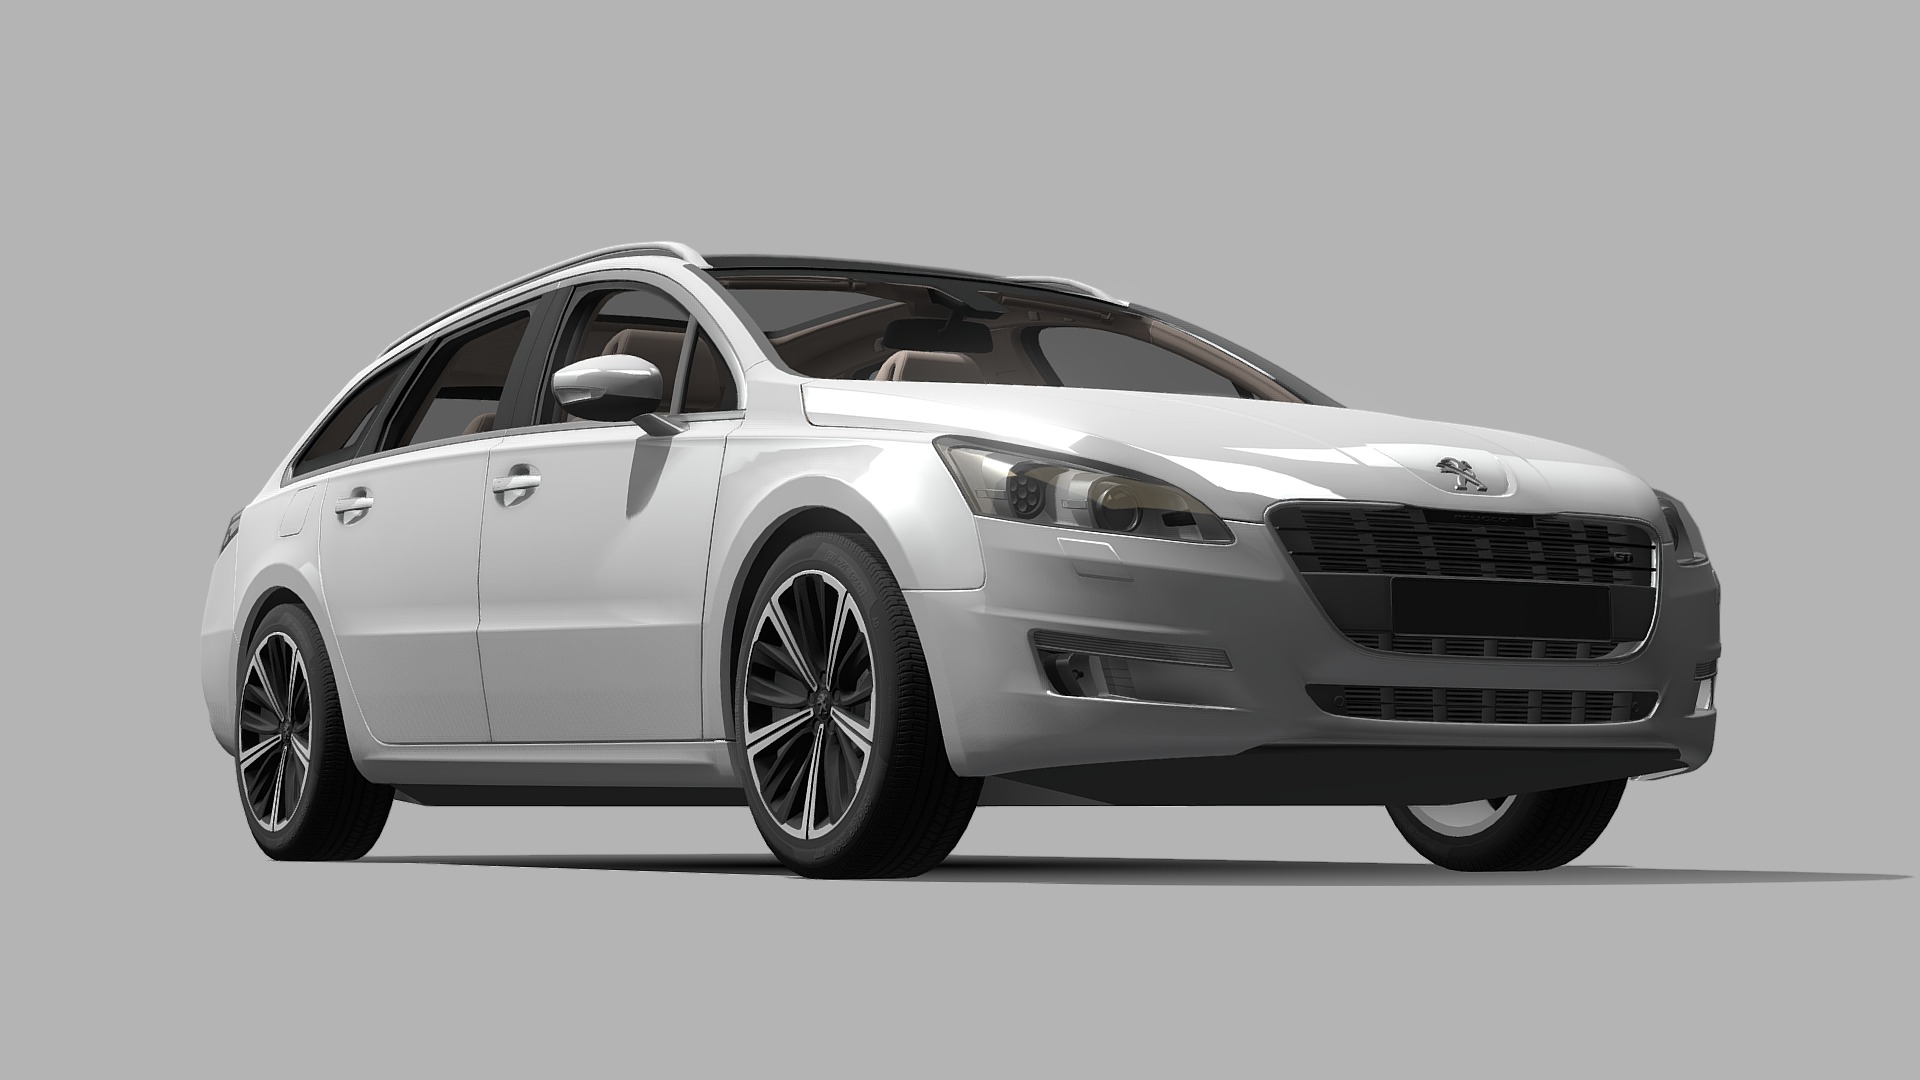 3D model Peugeot Salooncar Model - This is a 3D model of the Peugeot Salooncar Model. The 3D model is about a white car with a black background.